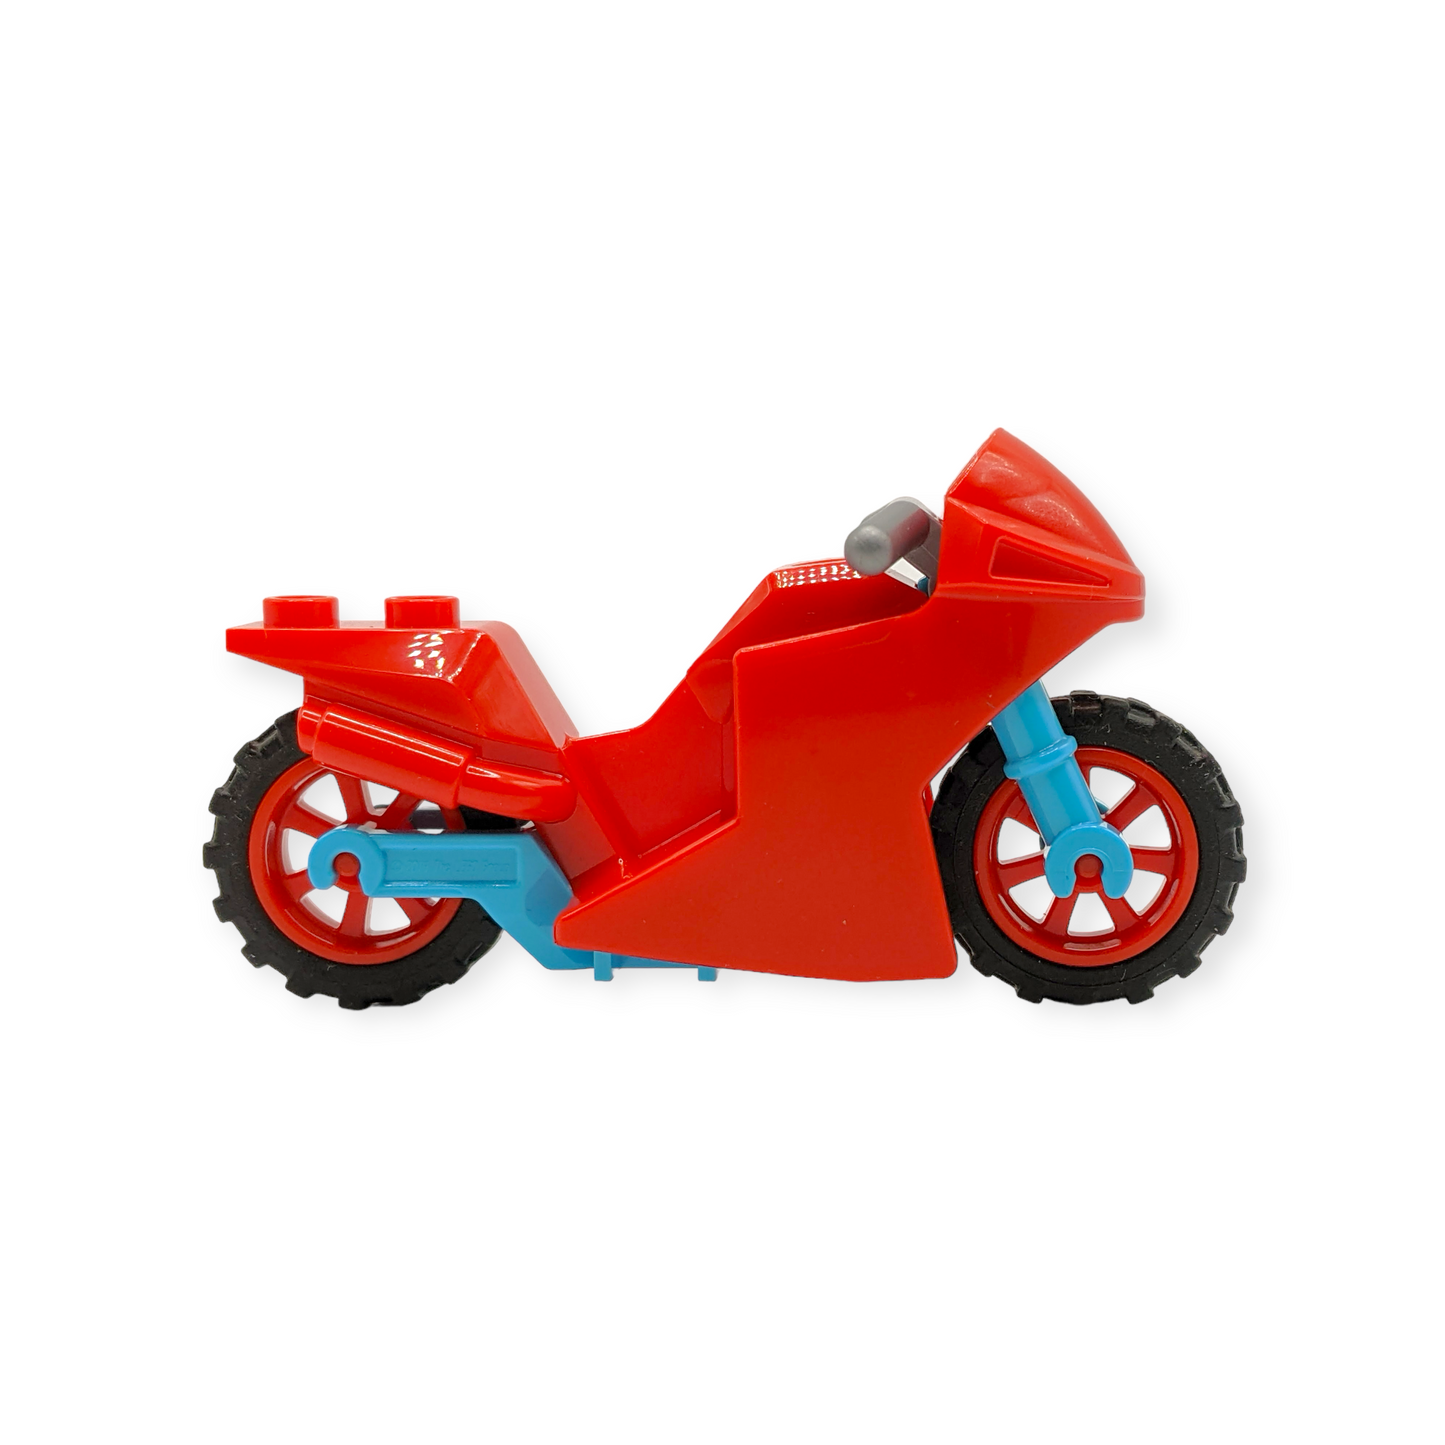 LEGO Motorcycle Sport Bike with Medium Azure Frame, Red Wheels and Flat Silver Handlebars